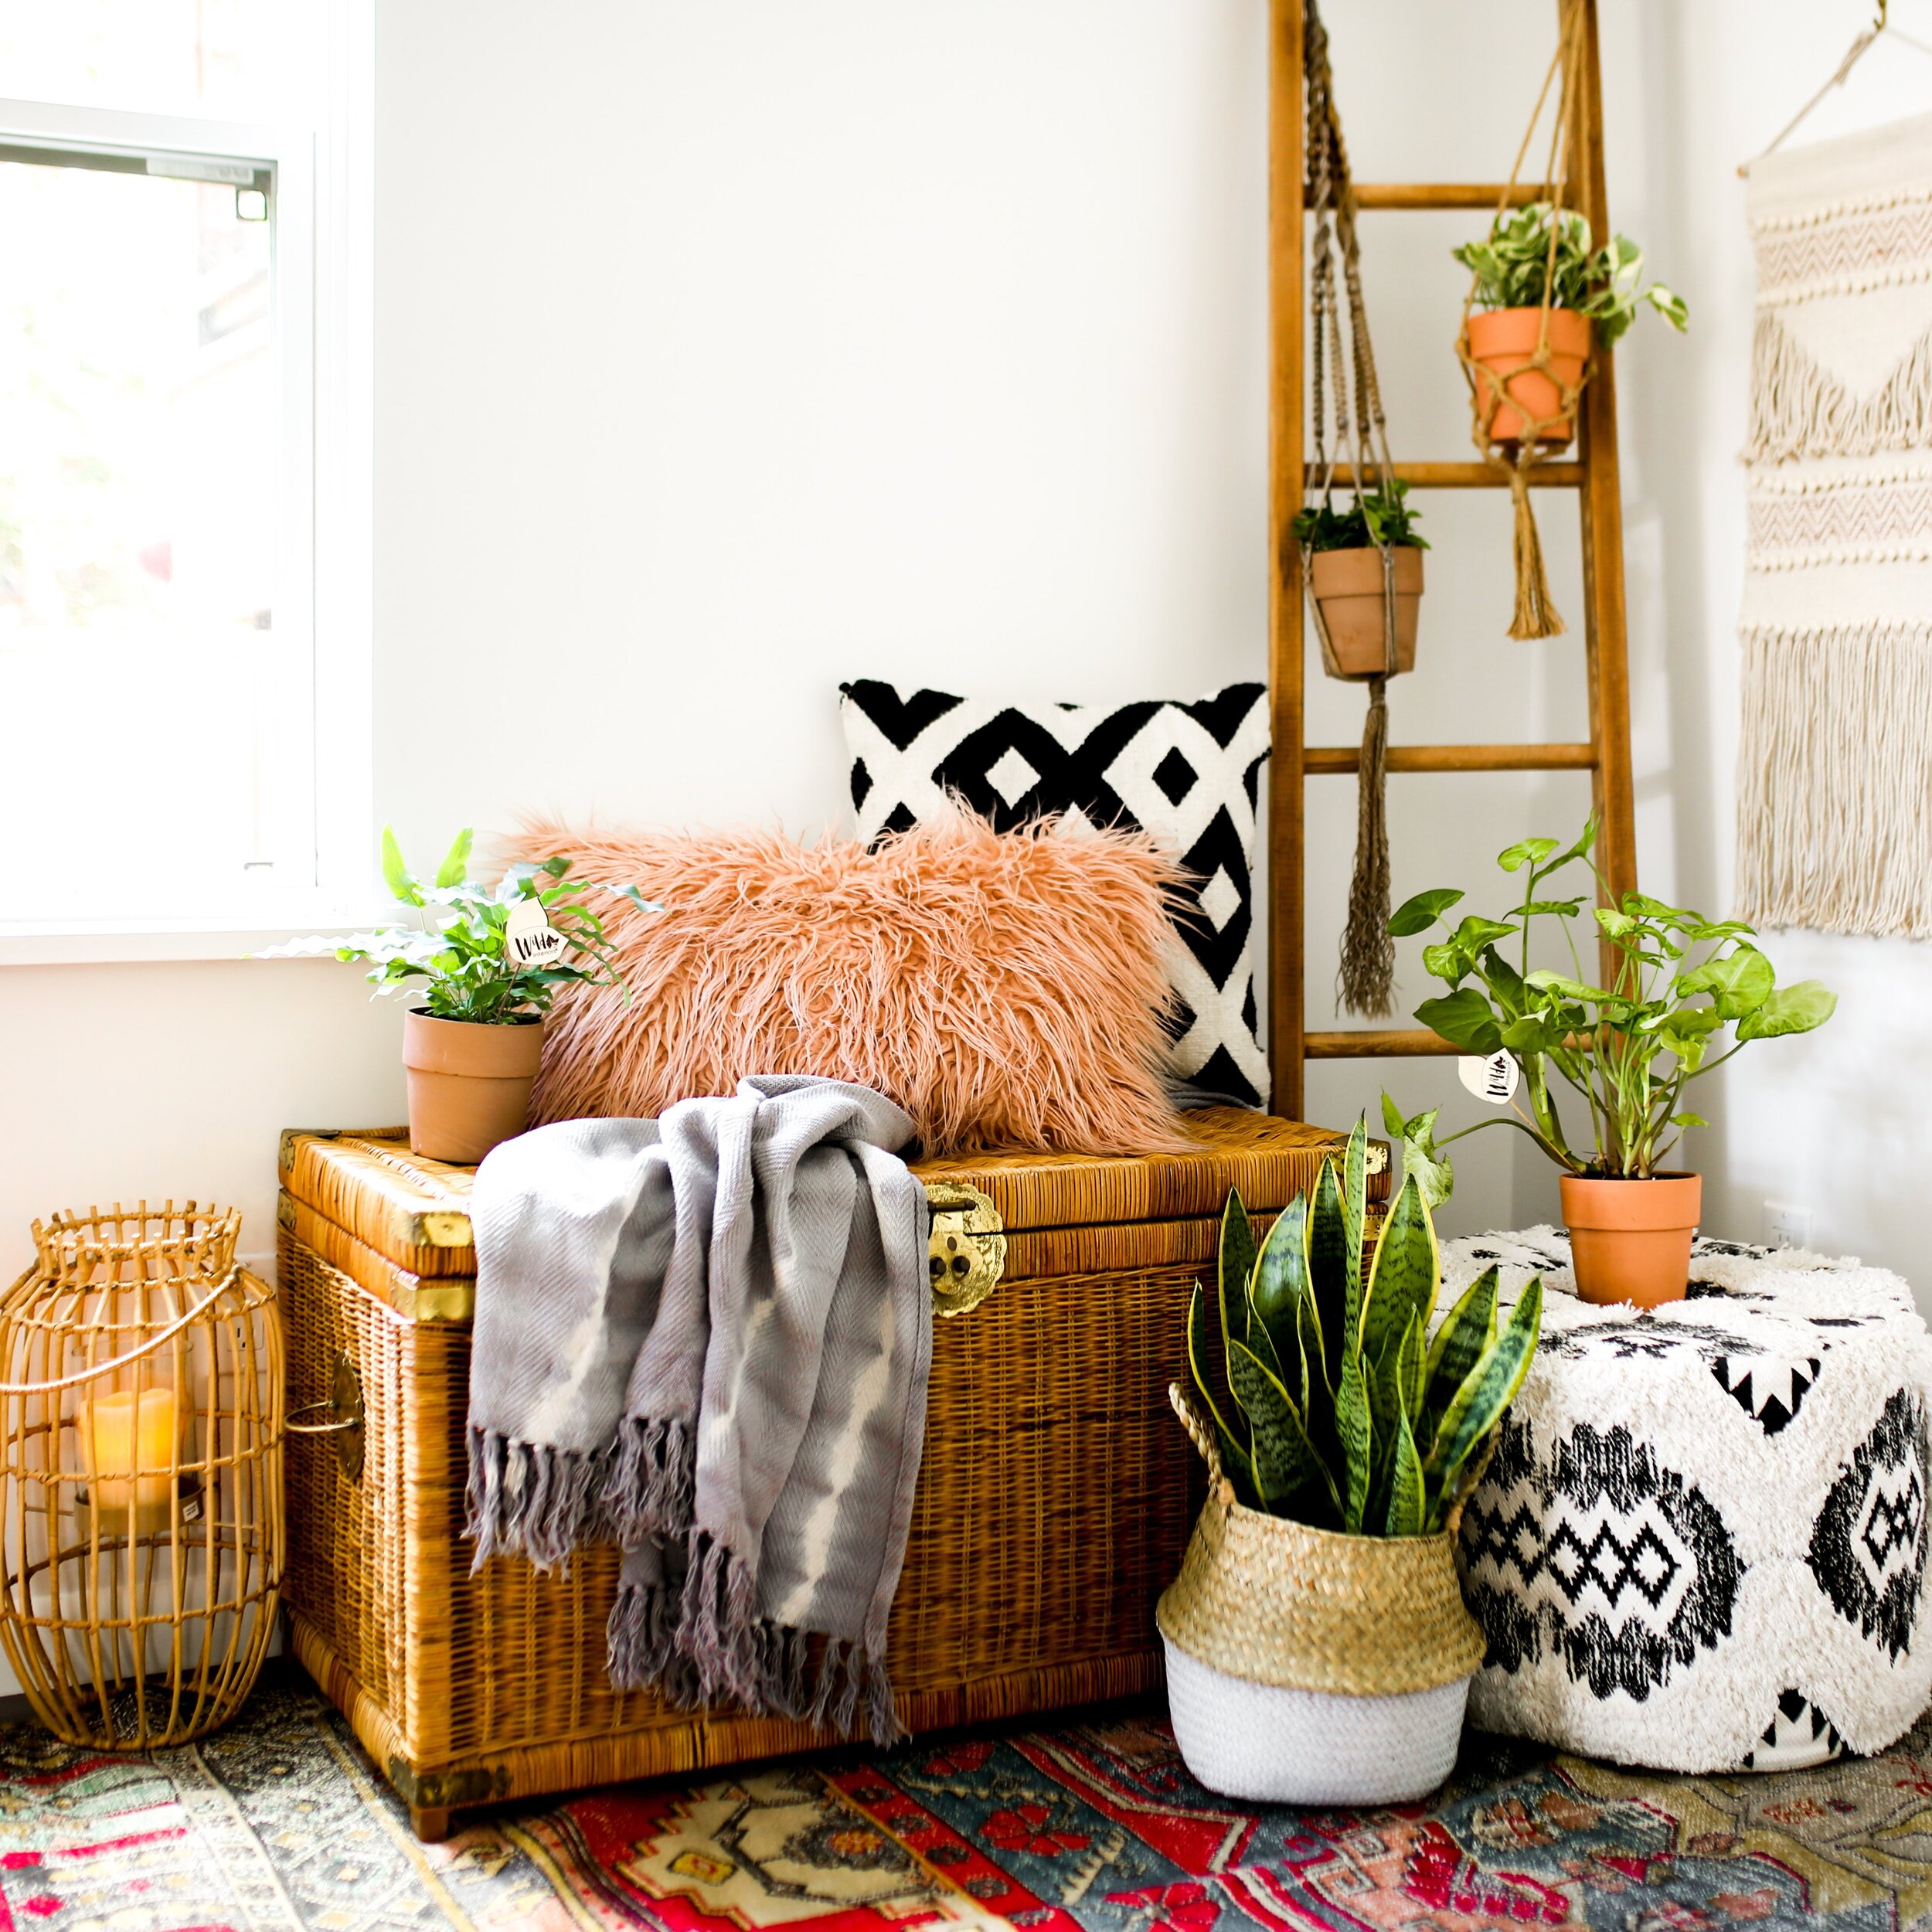 Decorating With Plants: A Boho Decor Guide